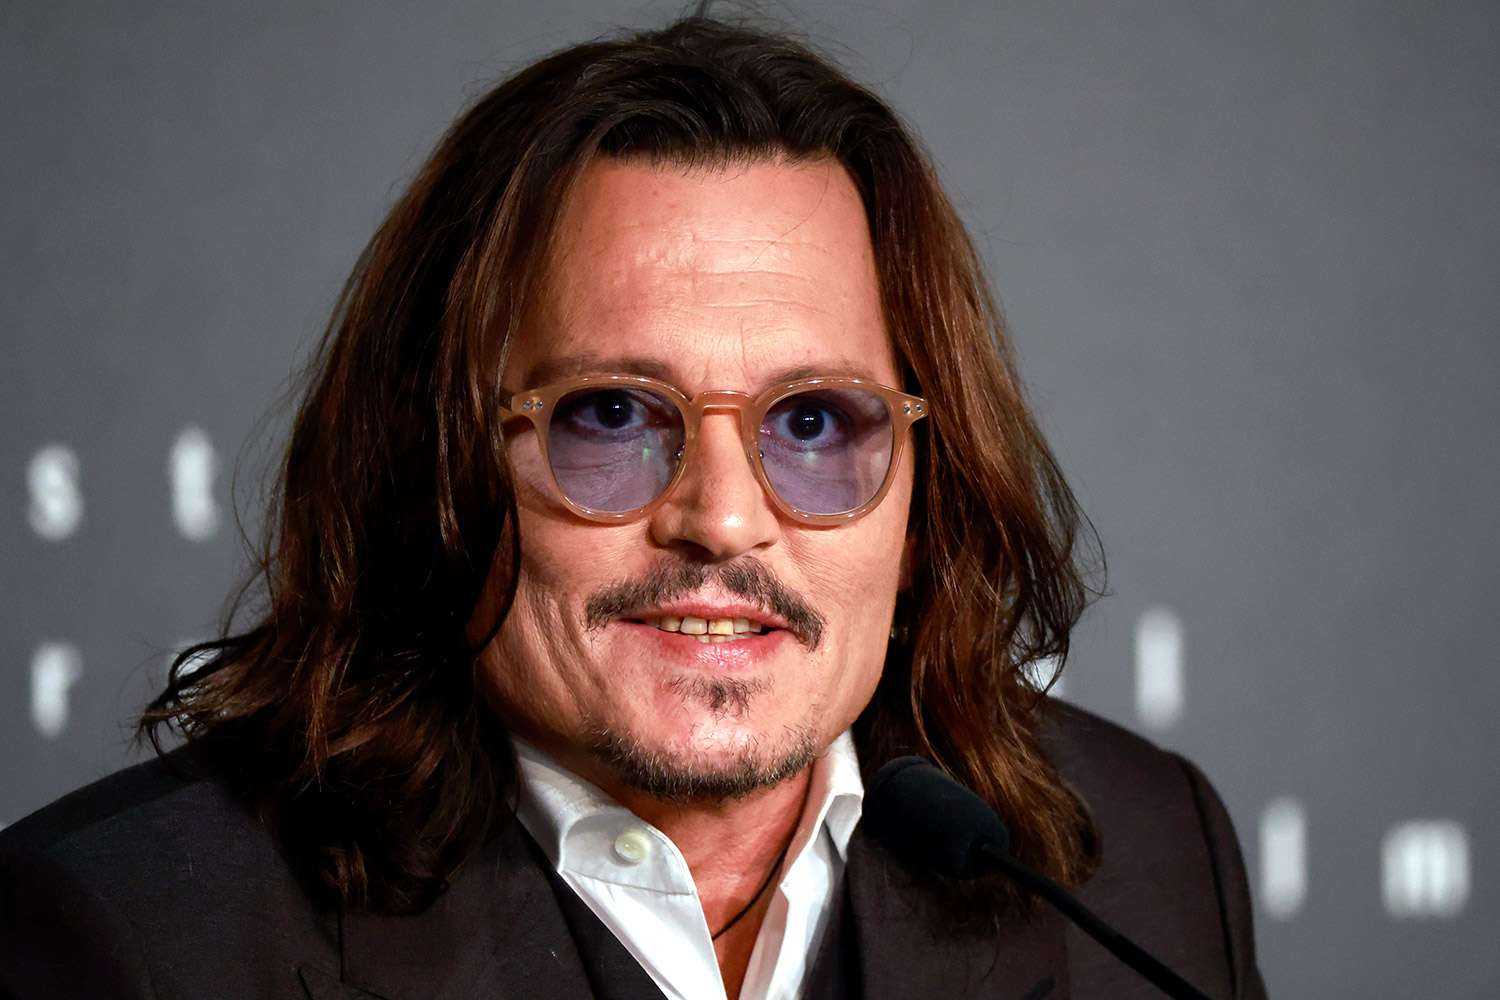 'Camille's performance during the Johnny Depp trial proved to the world ...